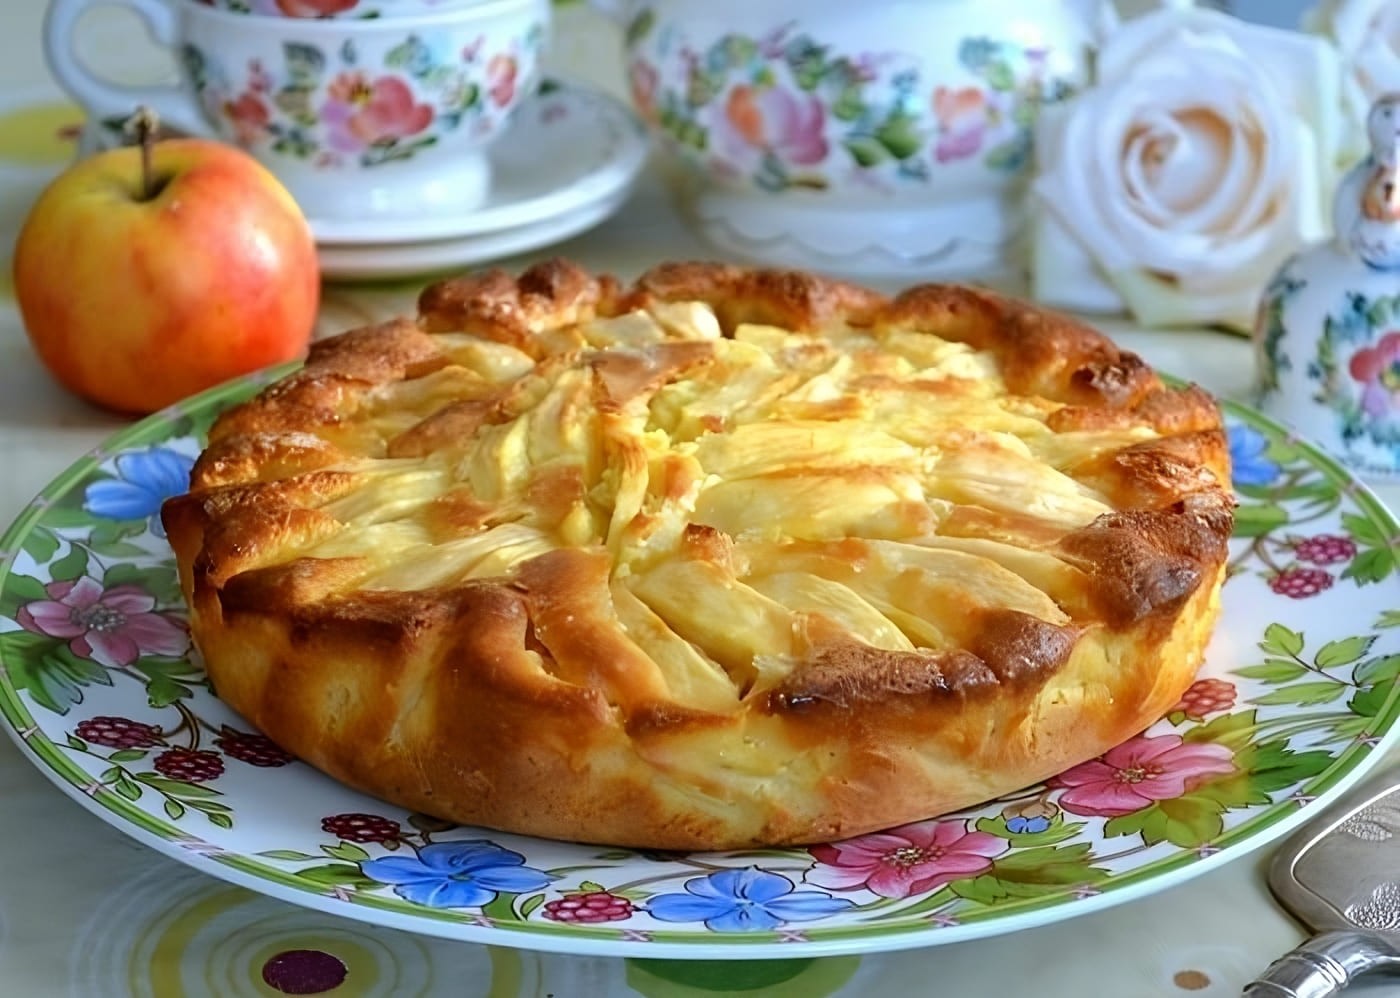 Italian Country-Style Apple Pie - an aroma beyond words!